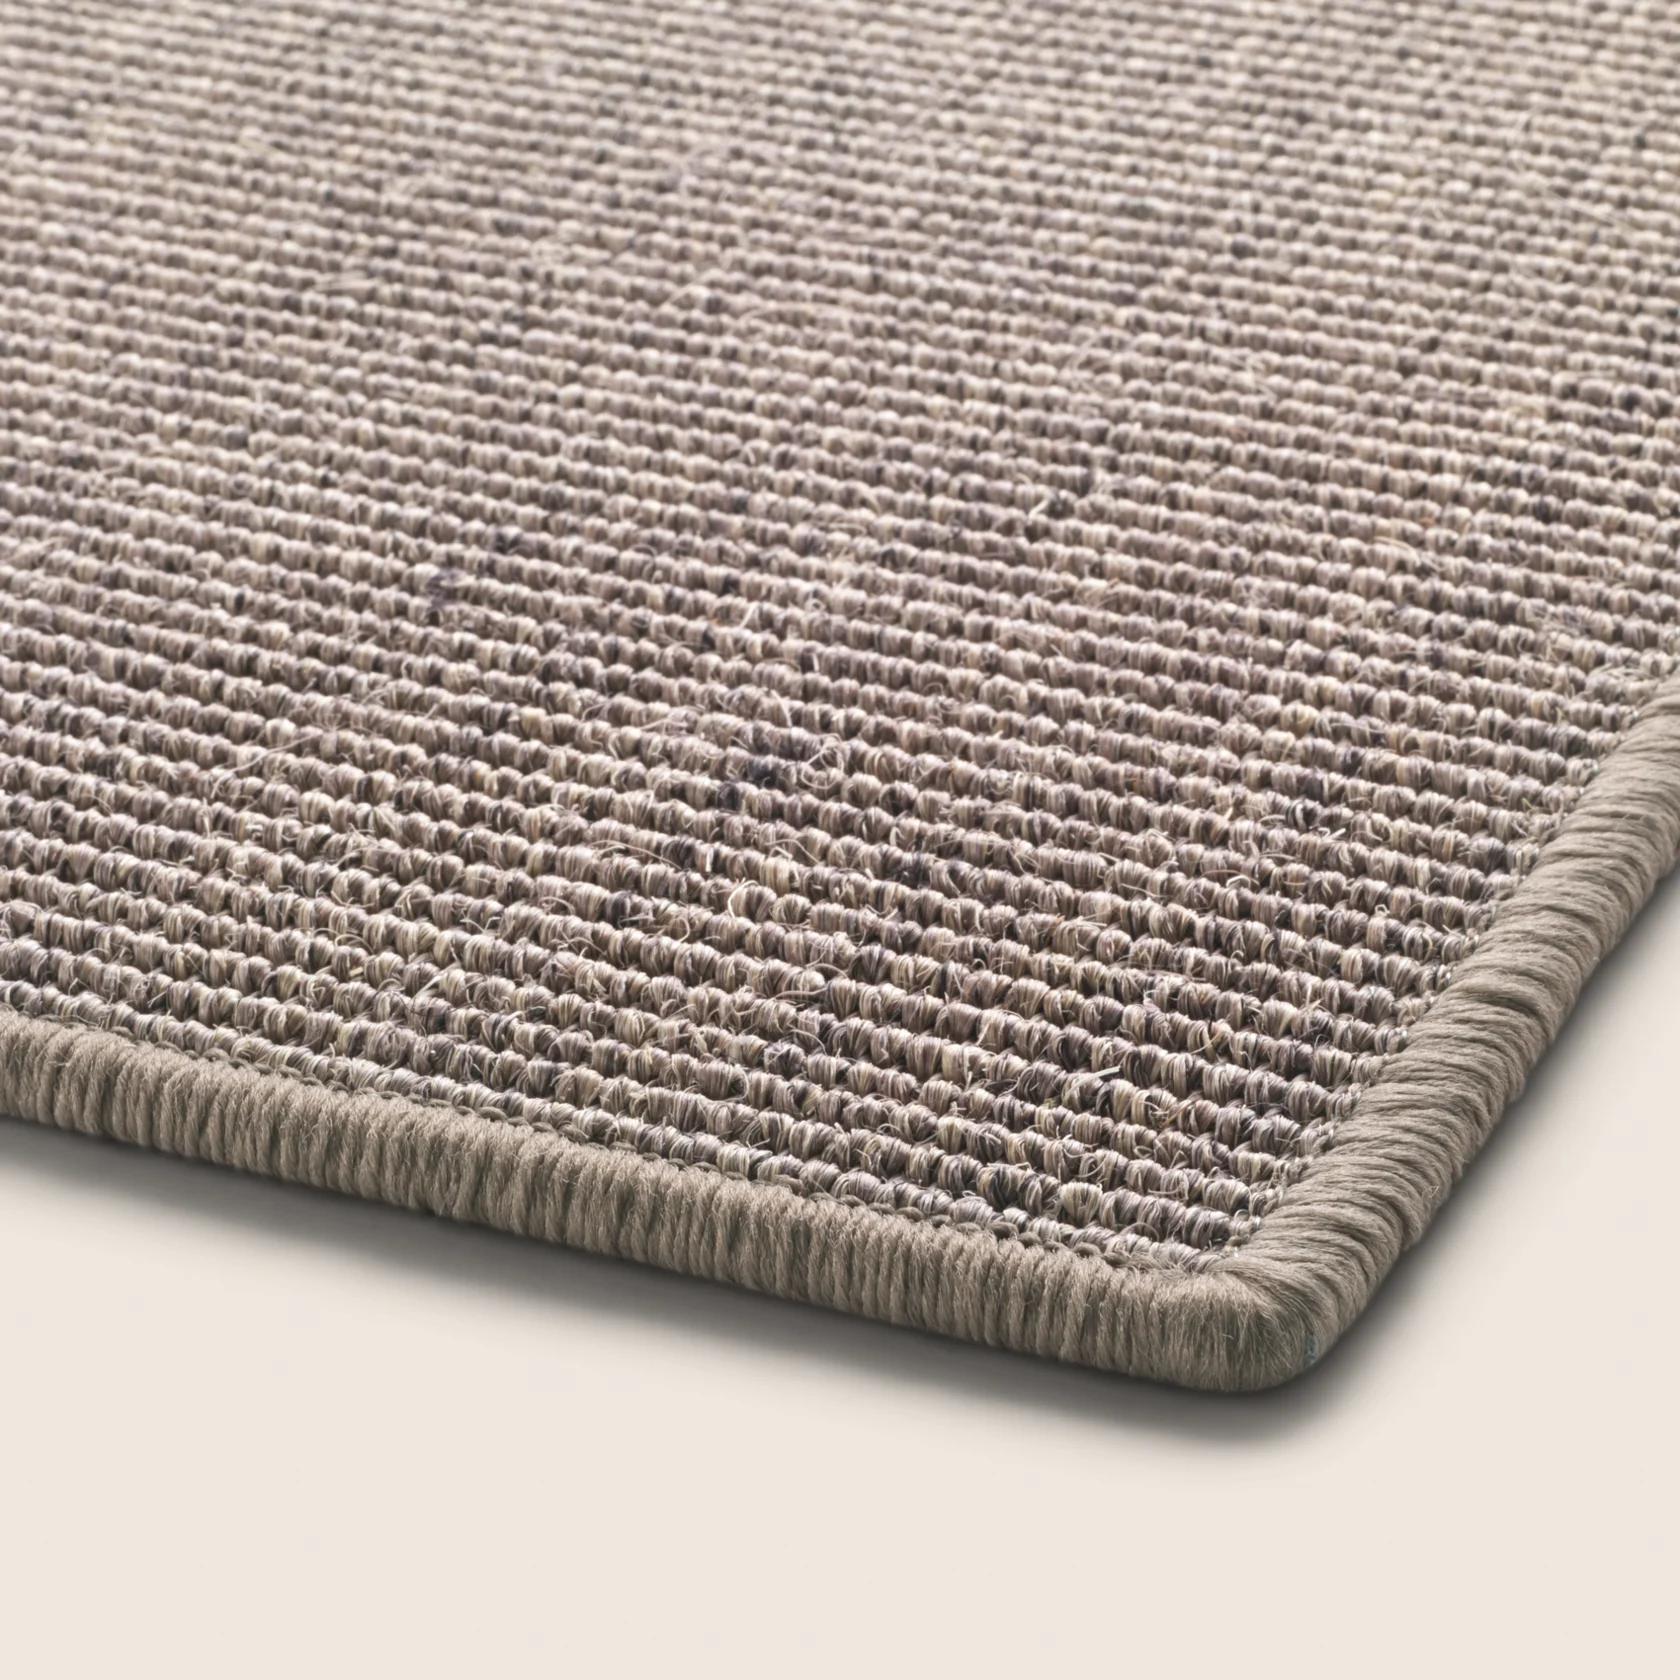 THE RUG COLLECTION Accessories | Design Made in Italy - Flexform